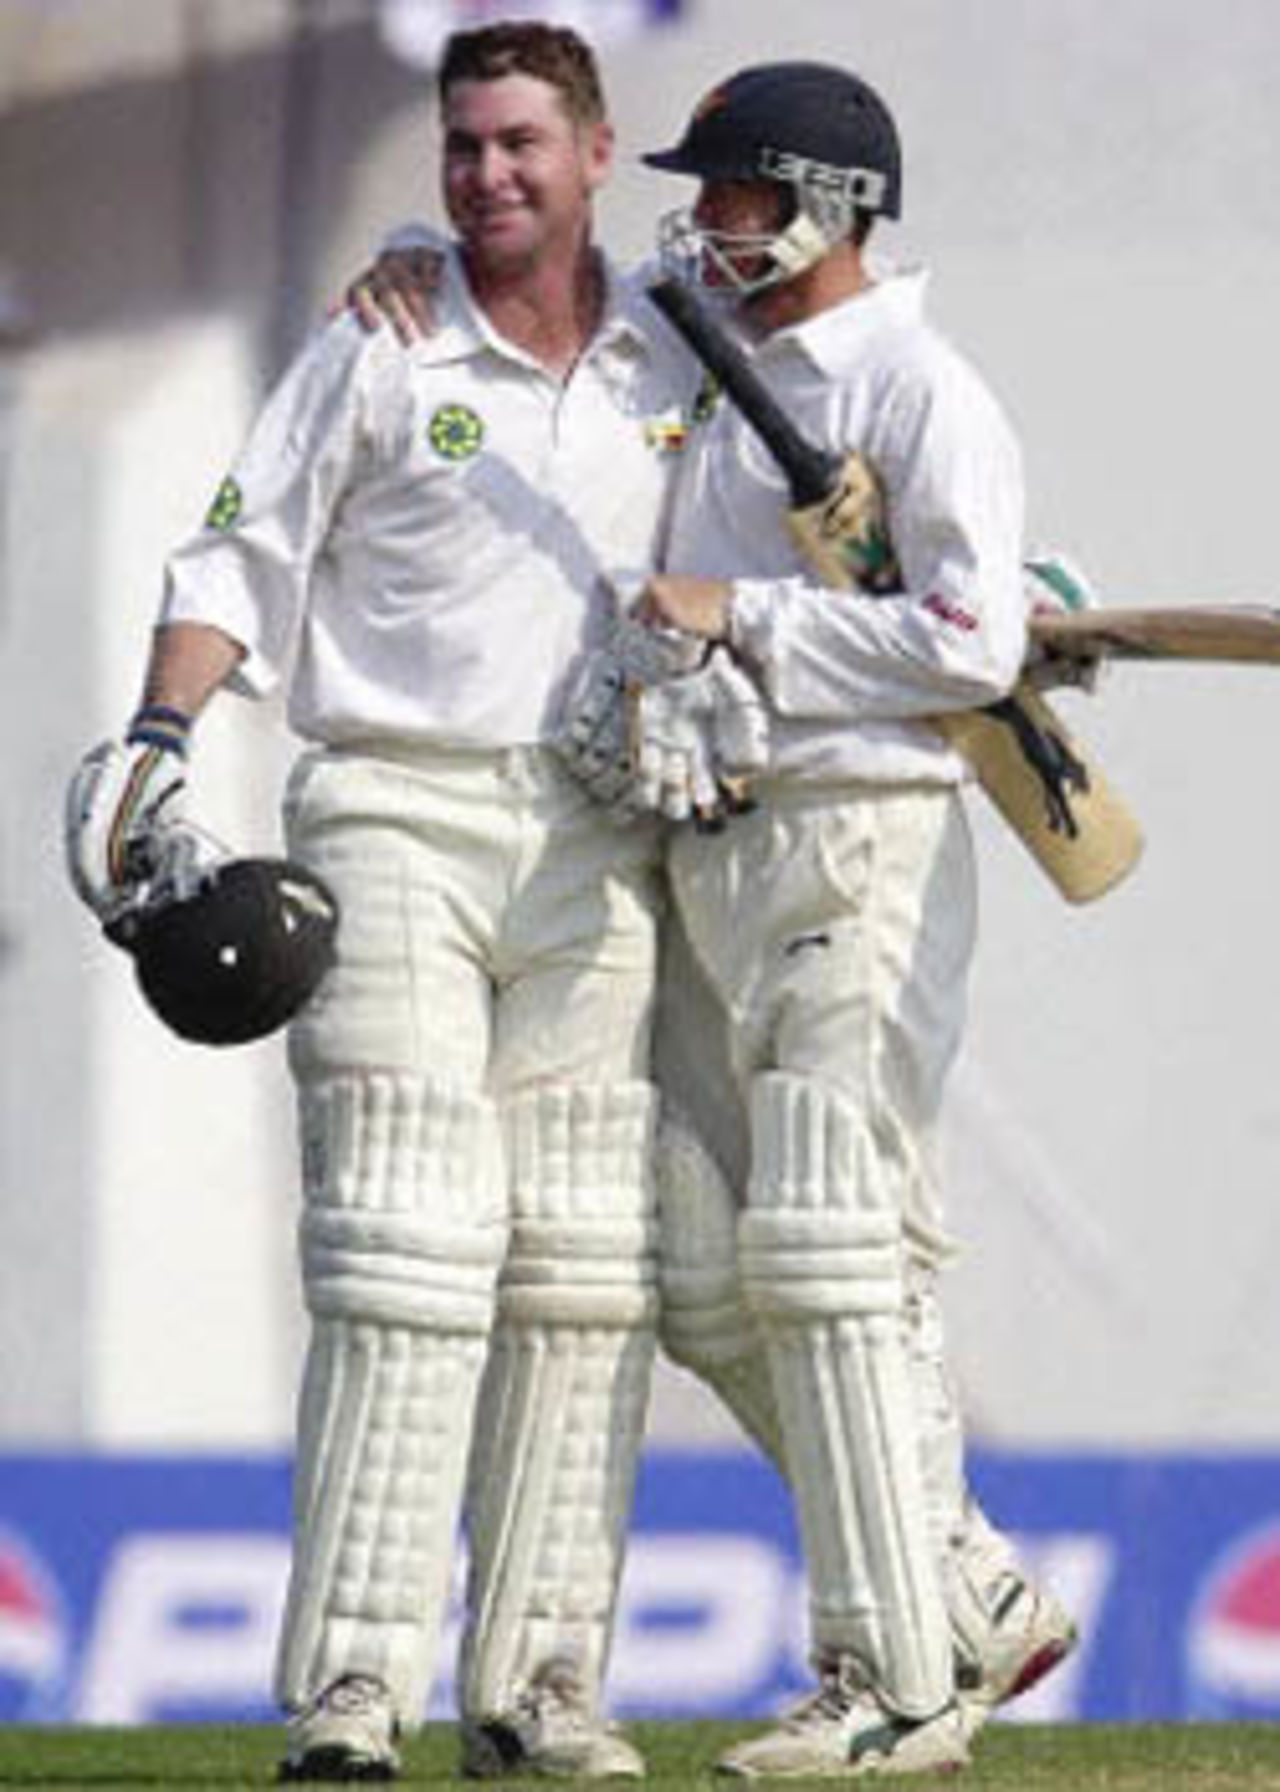 Andy Flower congratulates Alistair Campbell as he scores his first Test hundred, Zimbabwe in India, 2000/01, 2nd Test, India v Zimbabwe, Vidarbha C.A. Ground, Nagpur, 25-29 November 2000 (Day 5).